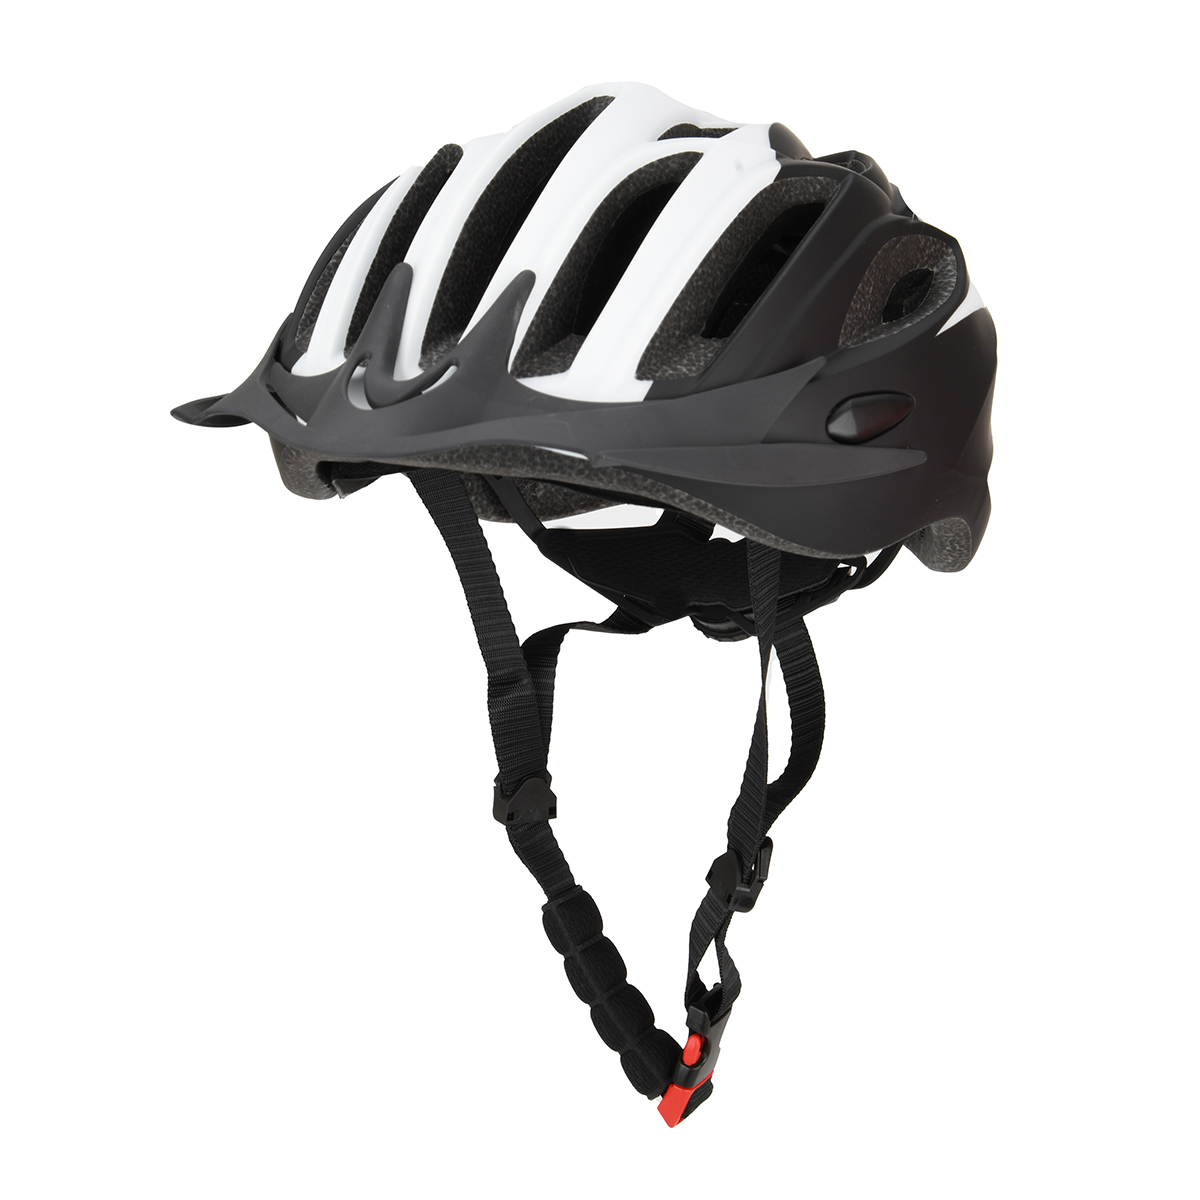 Casco Raleigh In Mold Hc 26,  image number null